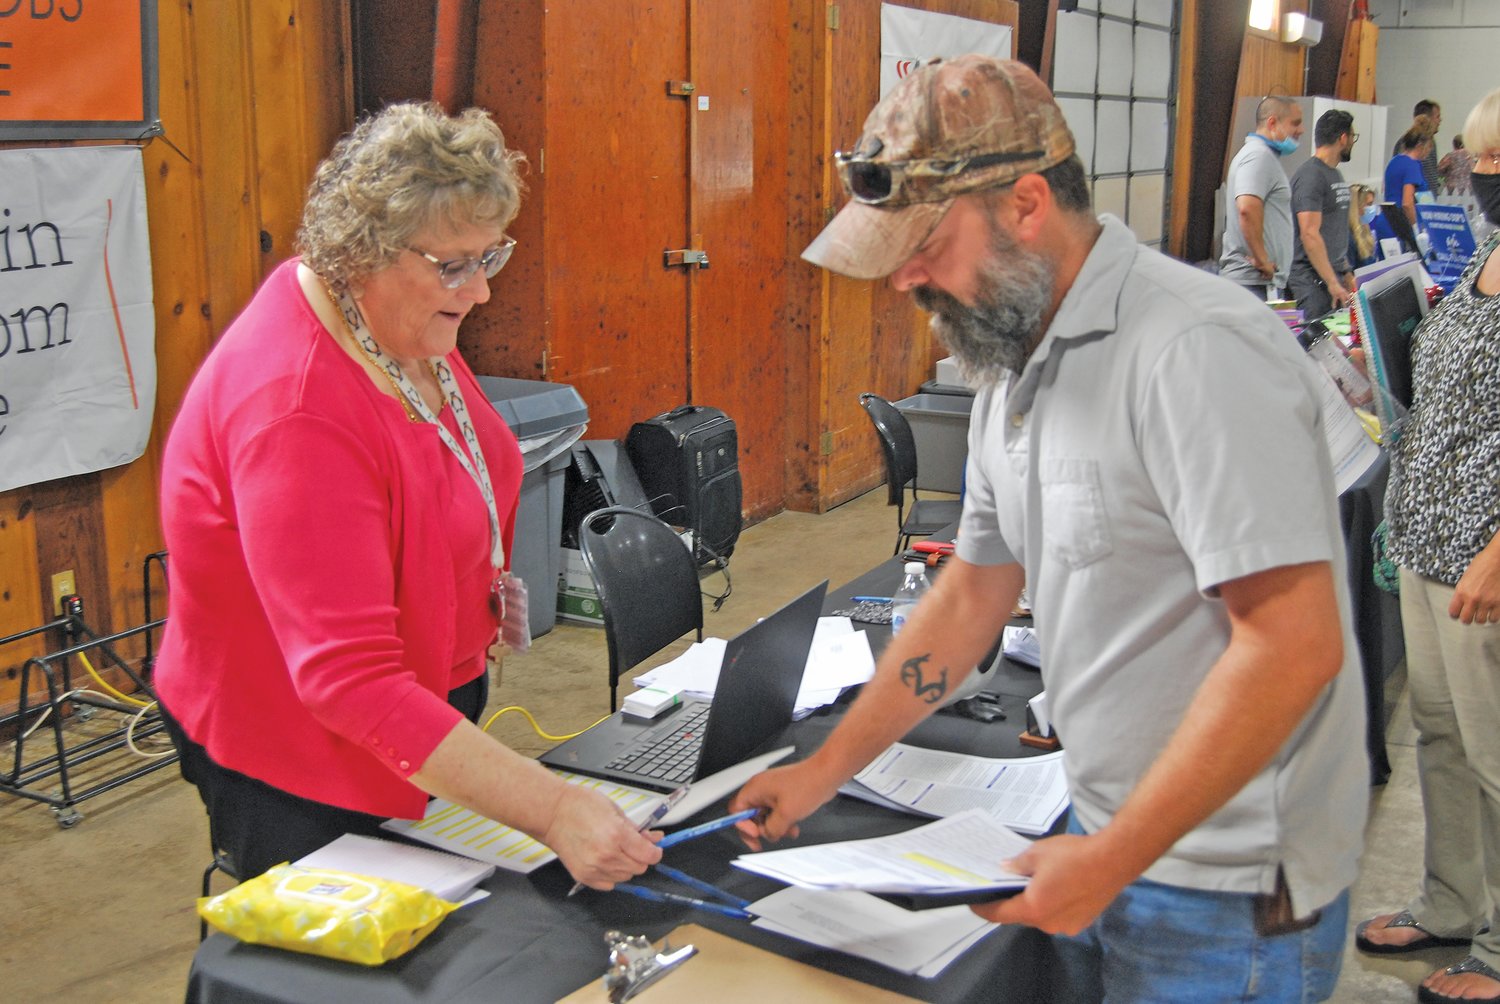 Bonnie Mann, director of human relations for Penguin Random House, hands a pen to Dan Busenbark, who gathered information on job opportunities Thursday at the Crawfordsville/Montgomery County Job Fair at the Montgomery County Fairgrounds.